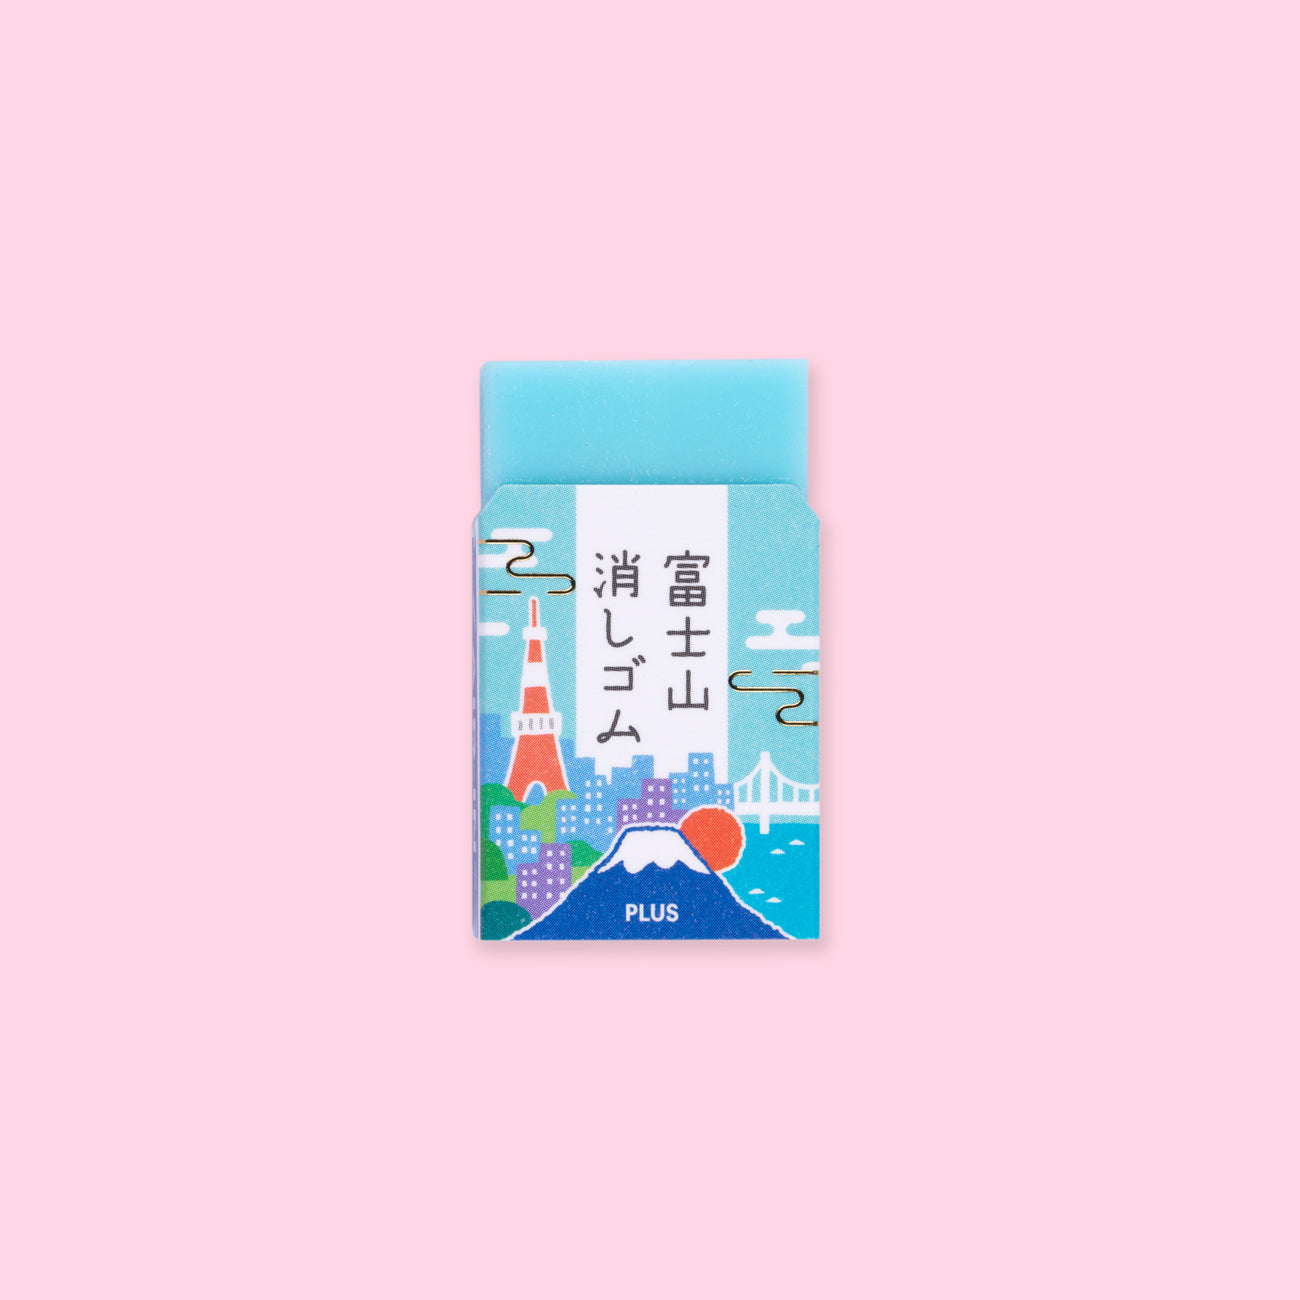 Plus Air-In Mount Fuji Eraser Gift Box Specification - Set of 2 - Shiro